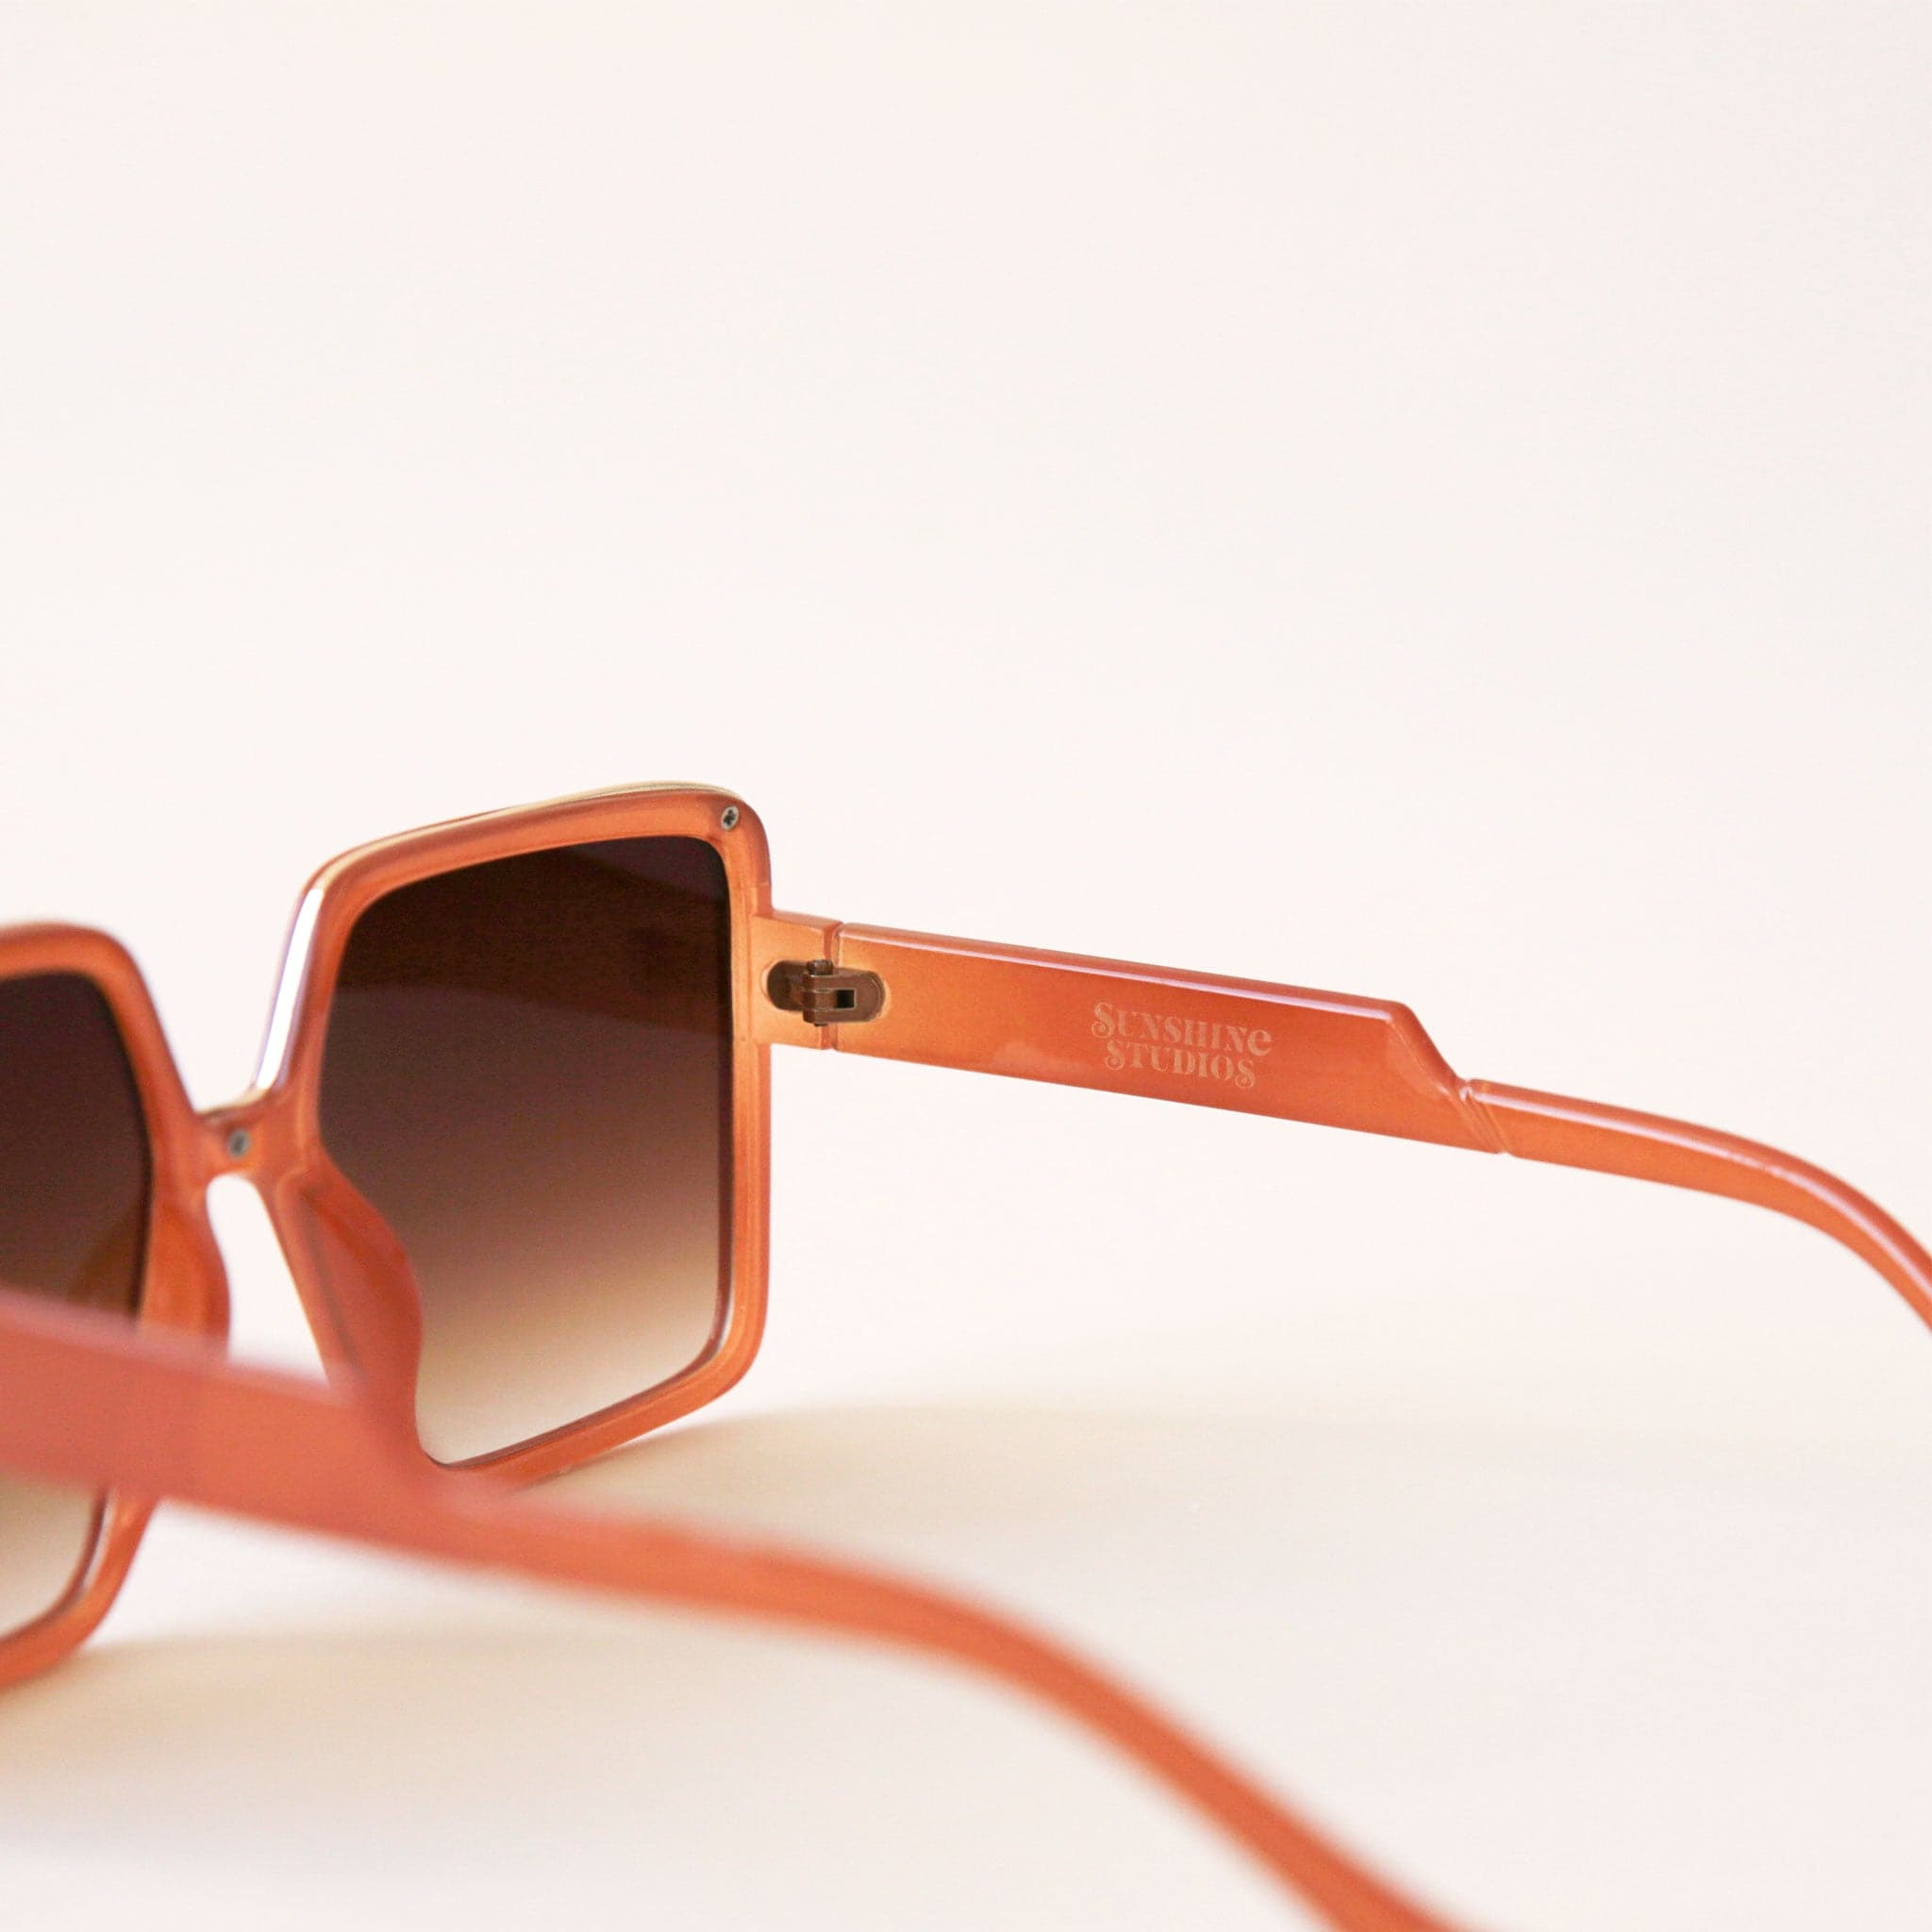 70&#39;s inspired square sunglasses with an oversized cognac colored frame and a brown lens.